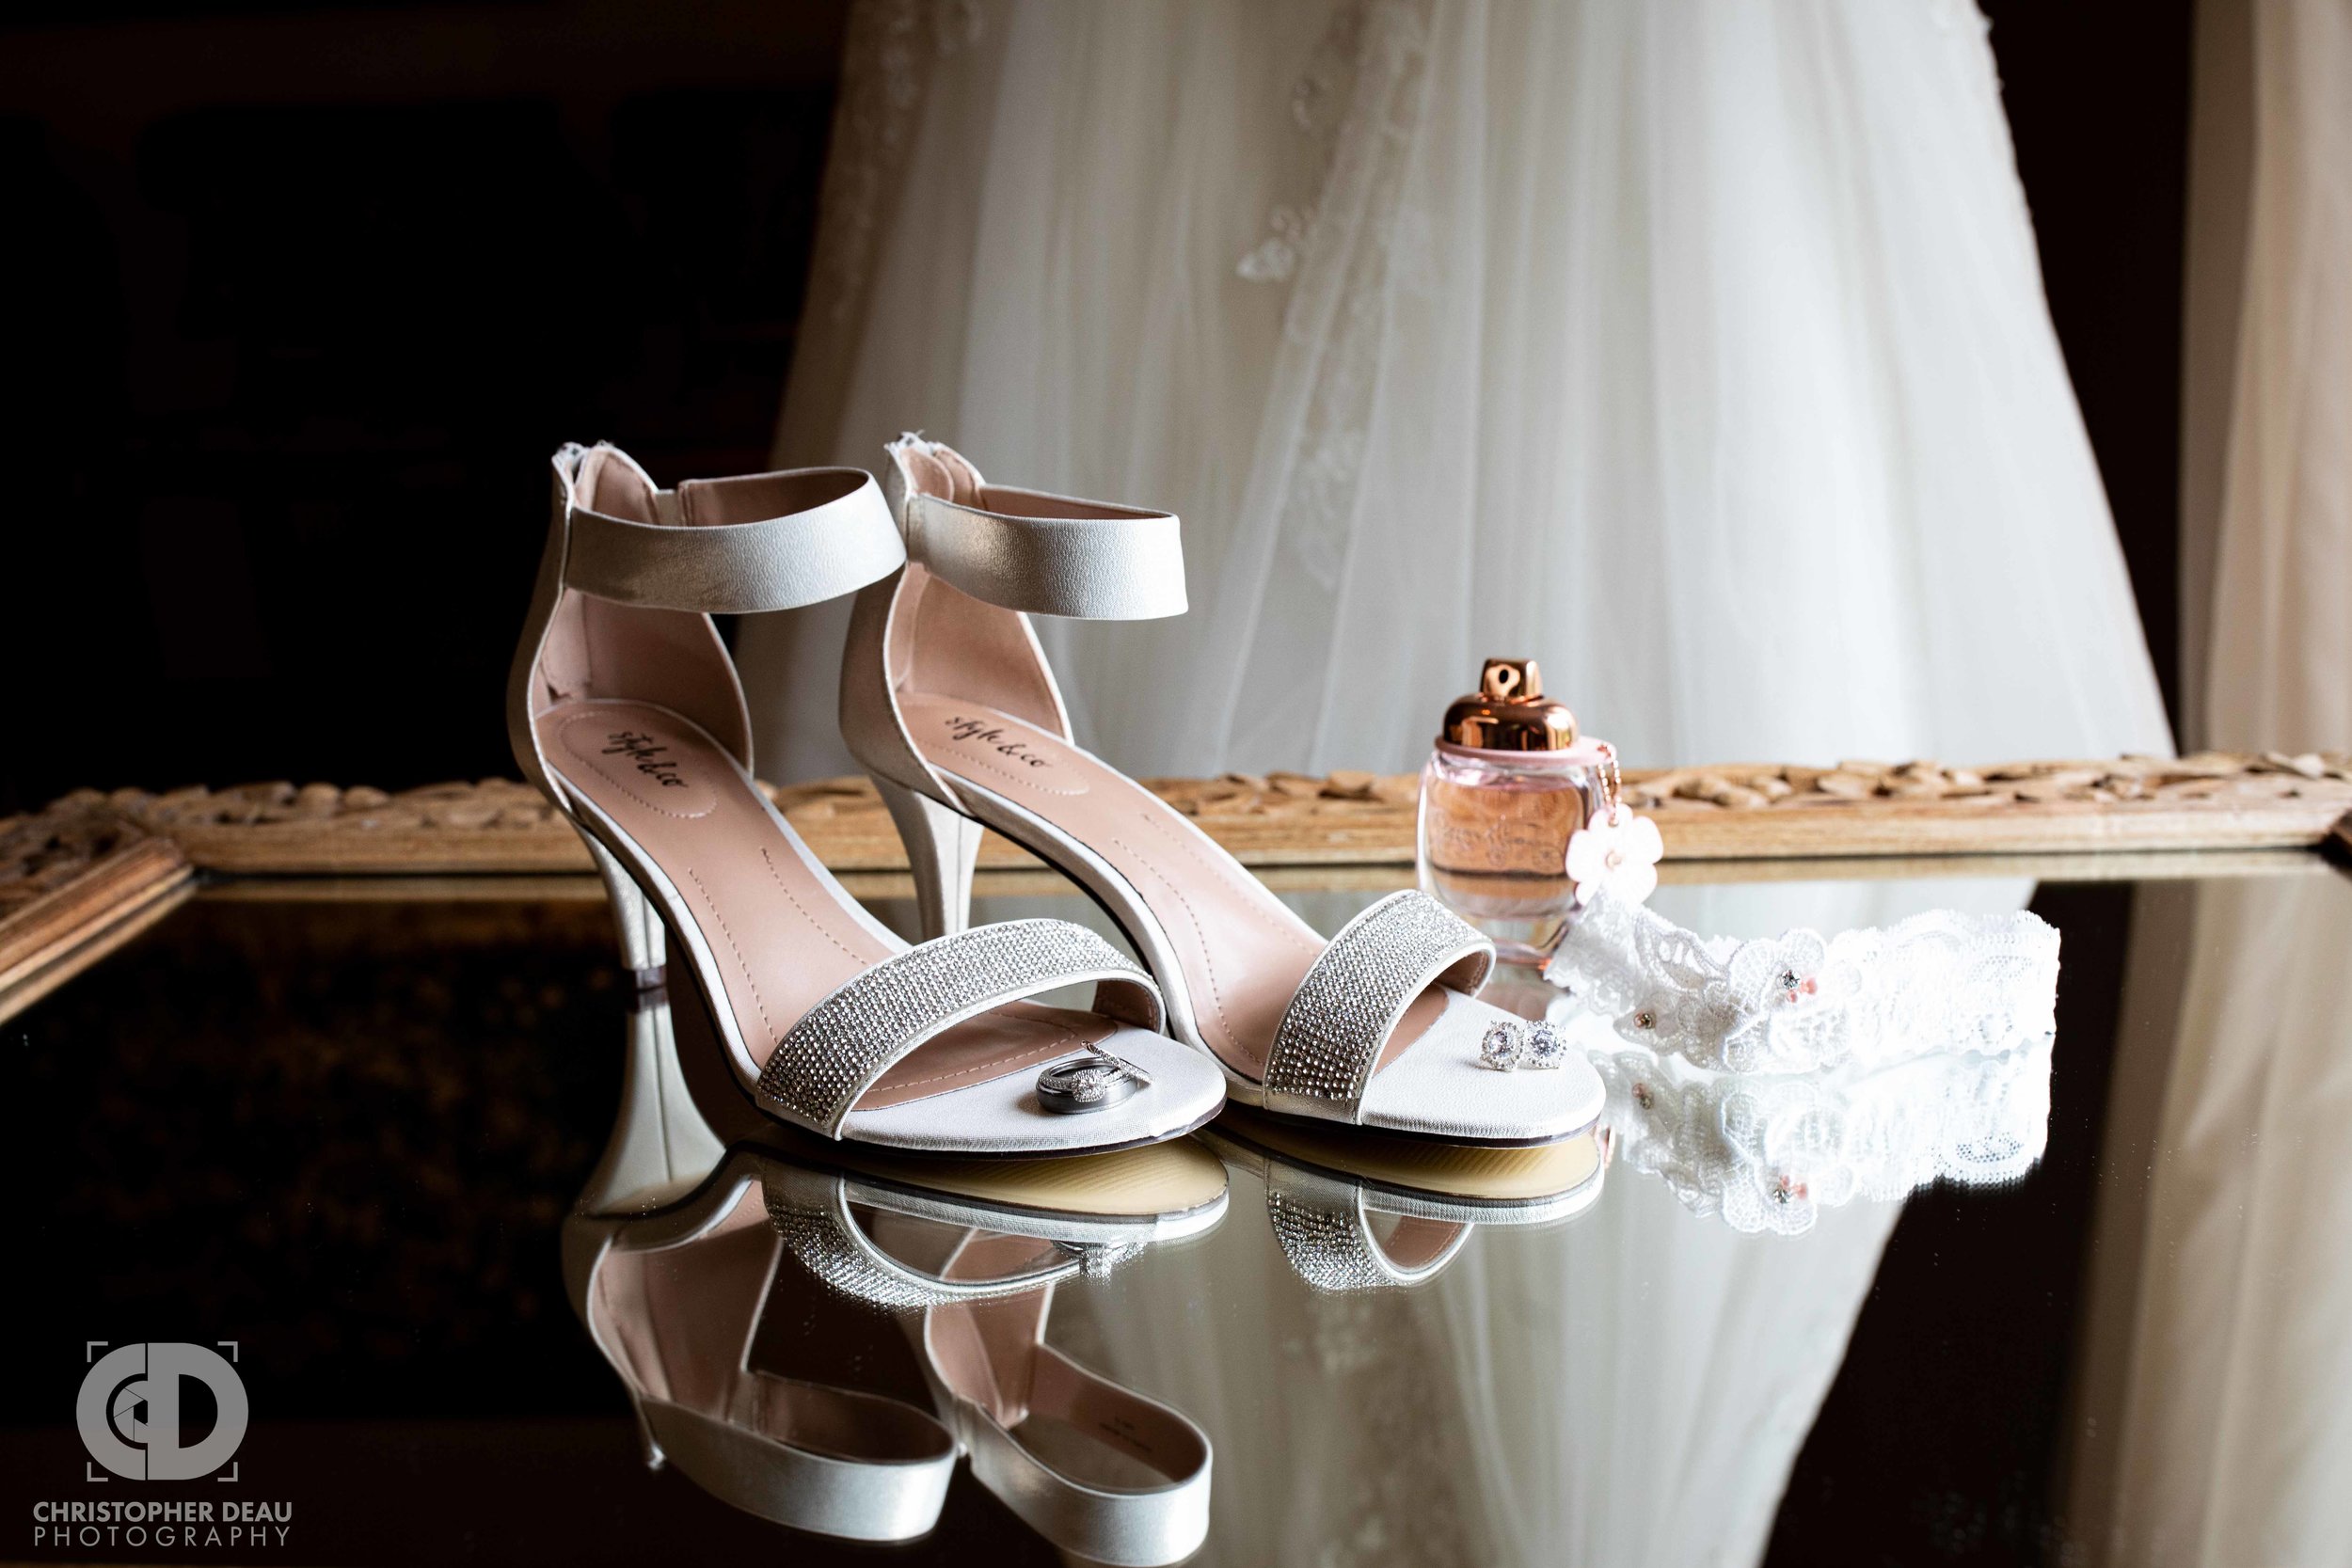  wedding dress, shoes, rings, and other jewelry 